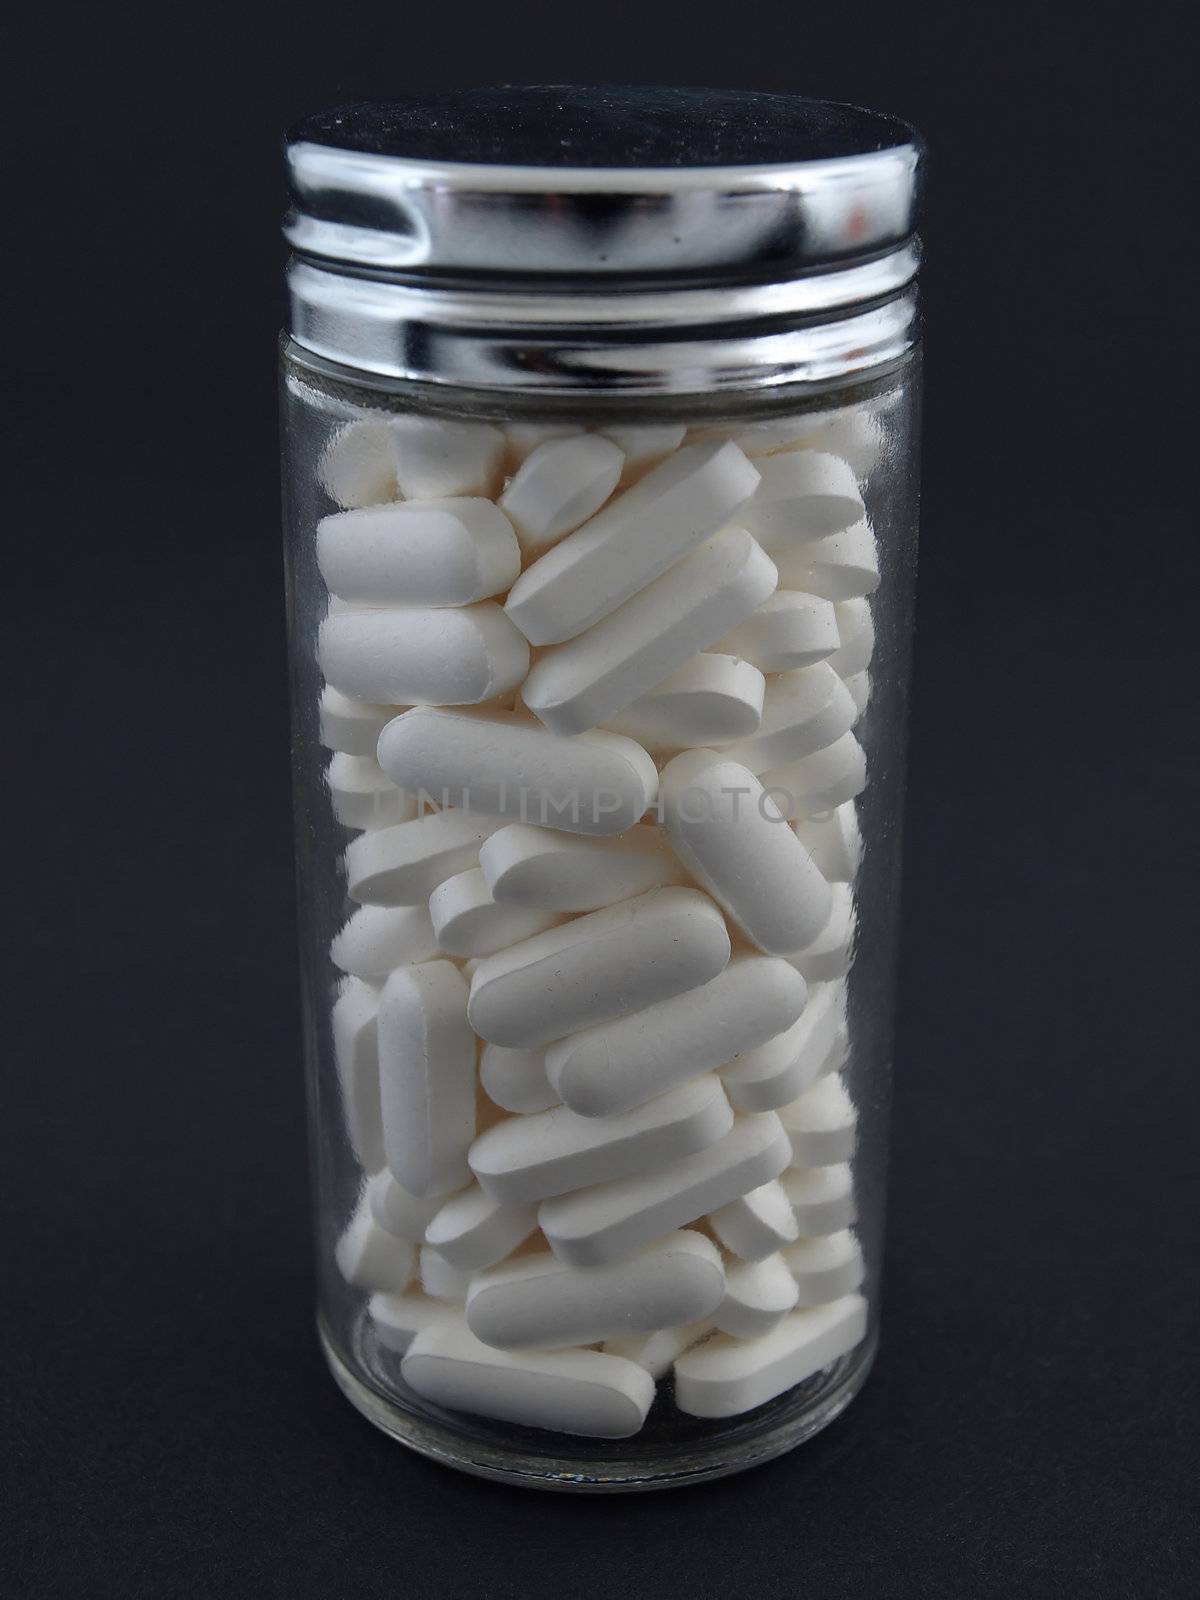 Large white pills in a glass jar, studio isolated against a black background.